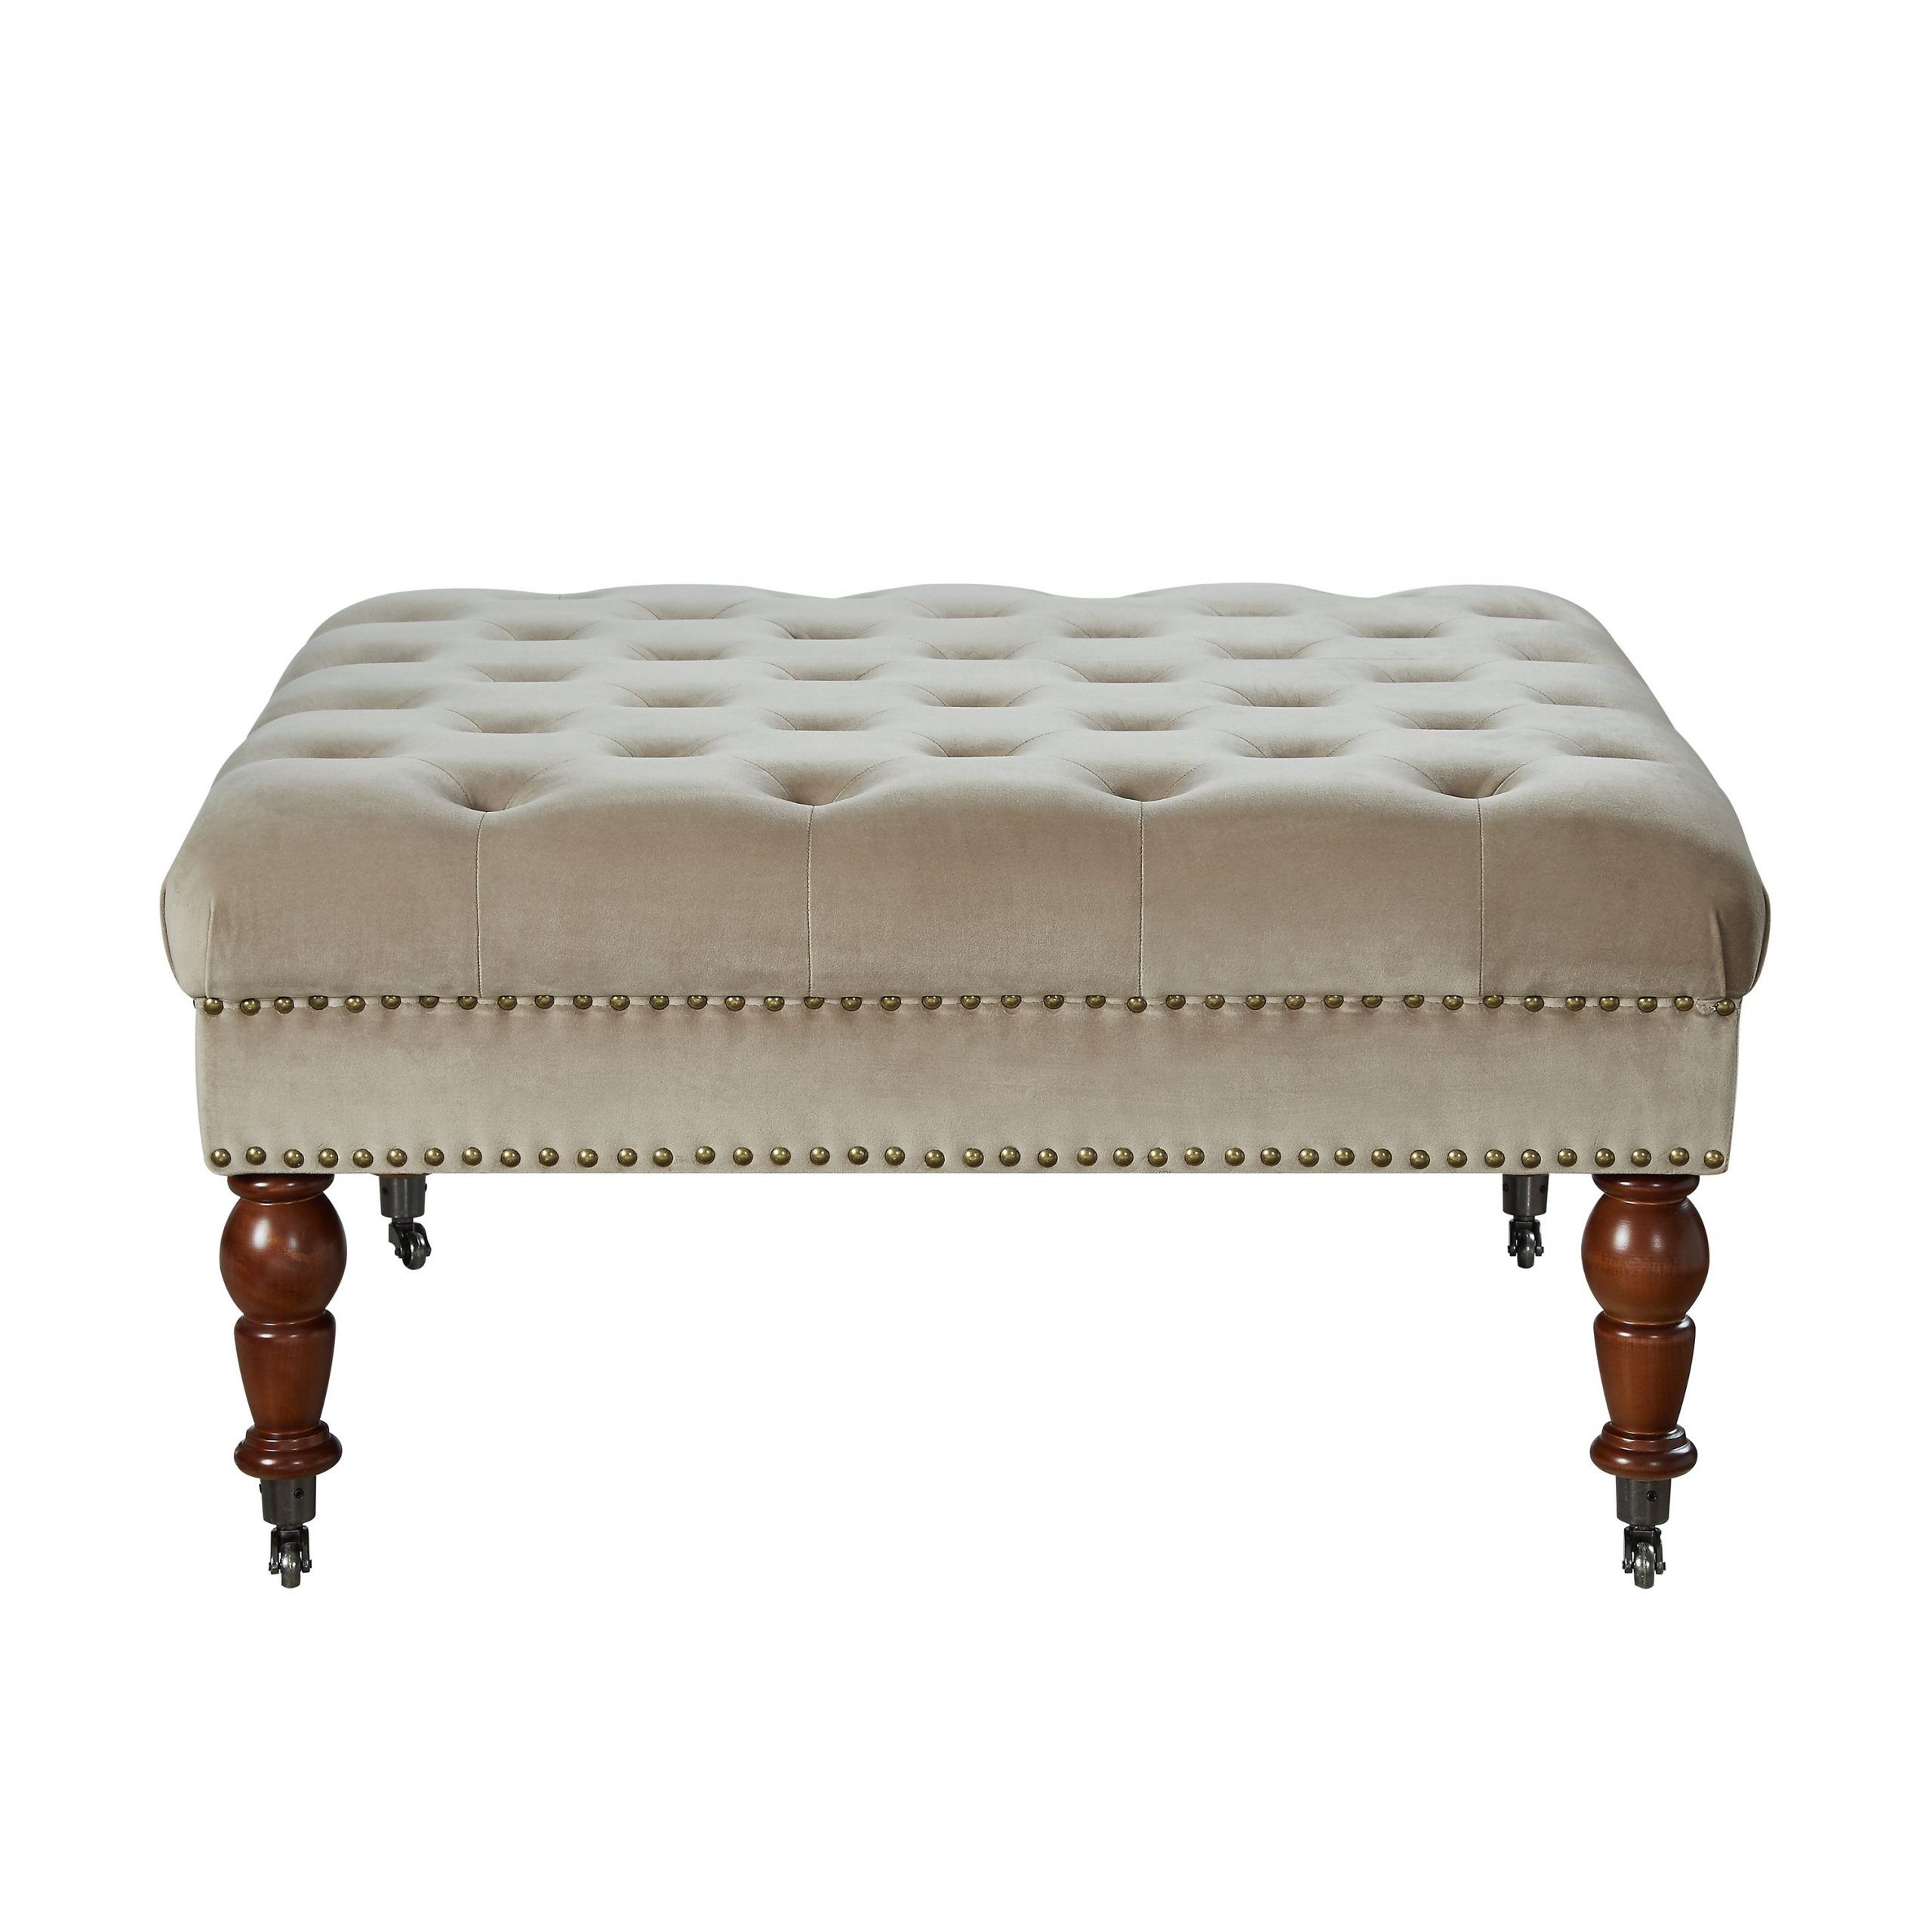 Tufted Ottoman Inside 2020 Caramel Leather And Bronze Steel Tufted Square Ottomans (View 8 of 10)